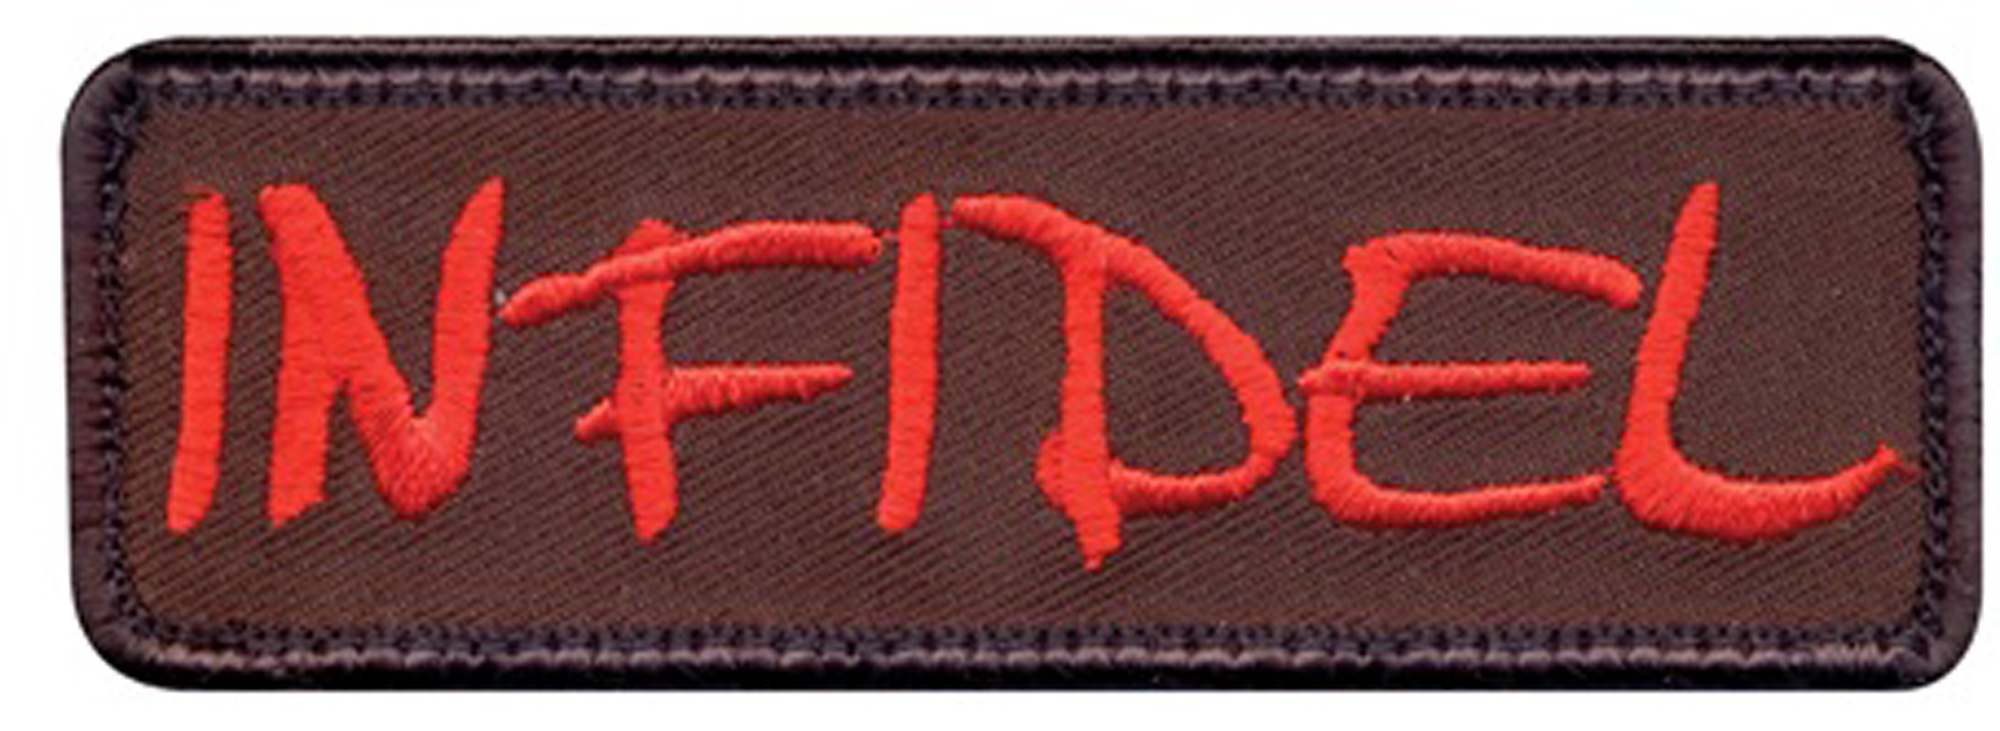 Rothco Infidel Patch New Velcro Back 72188